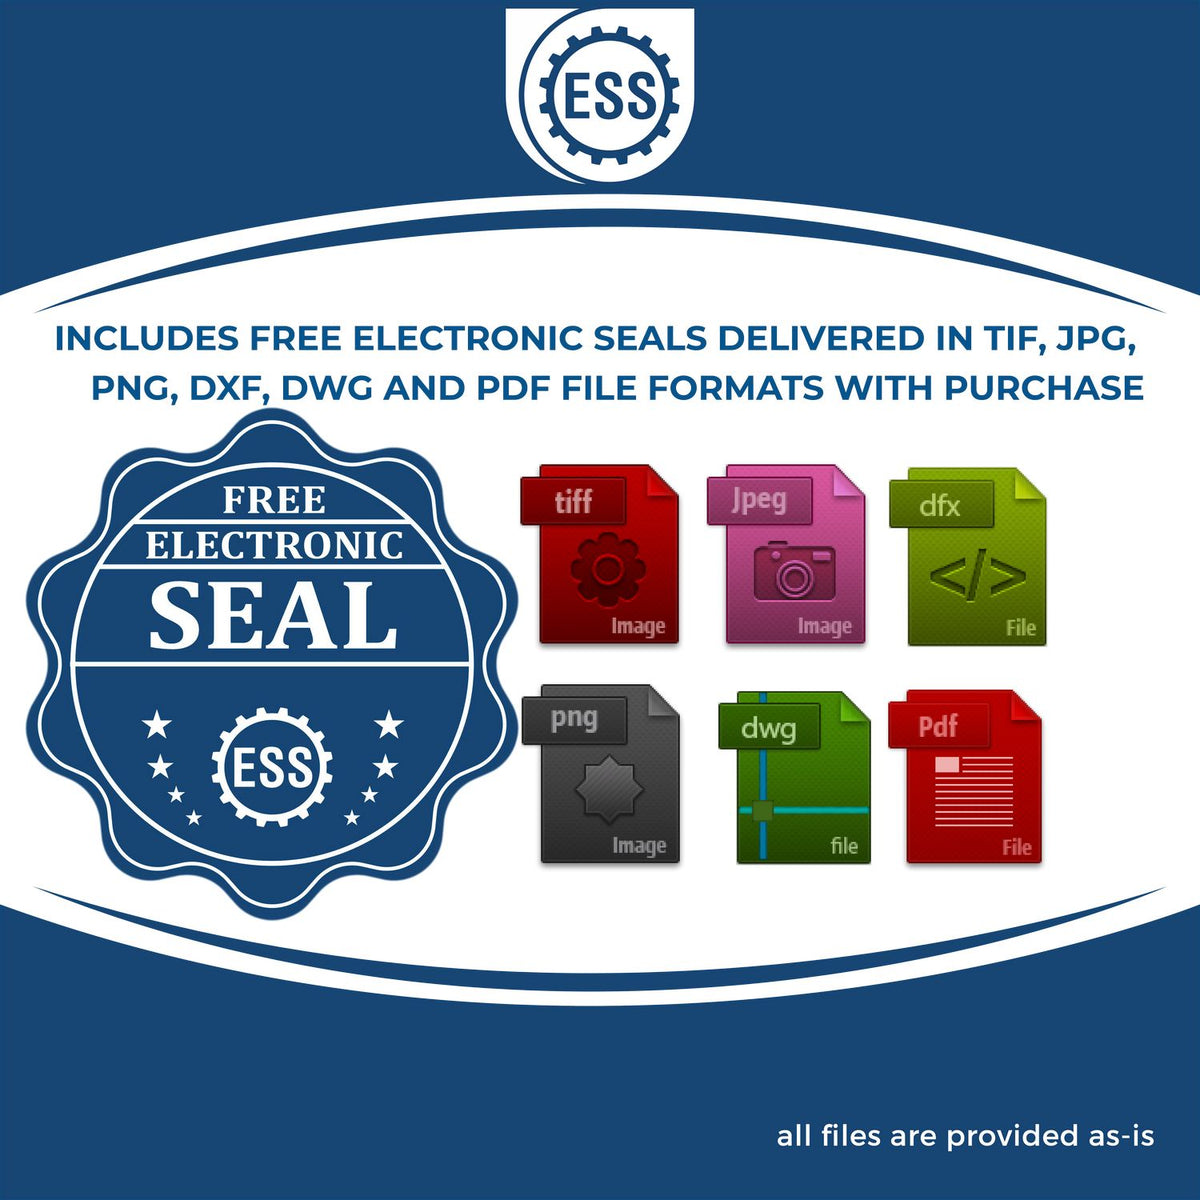 An infographic for the free electronic seal for the Slim Pre-Inked Vermont Land Surveyor Seal Stamp illustrating the different file type icons such as DXF, DWG, TIF, JPG and PNG.